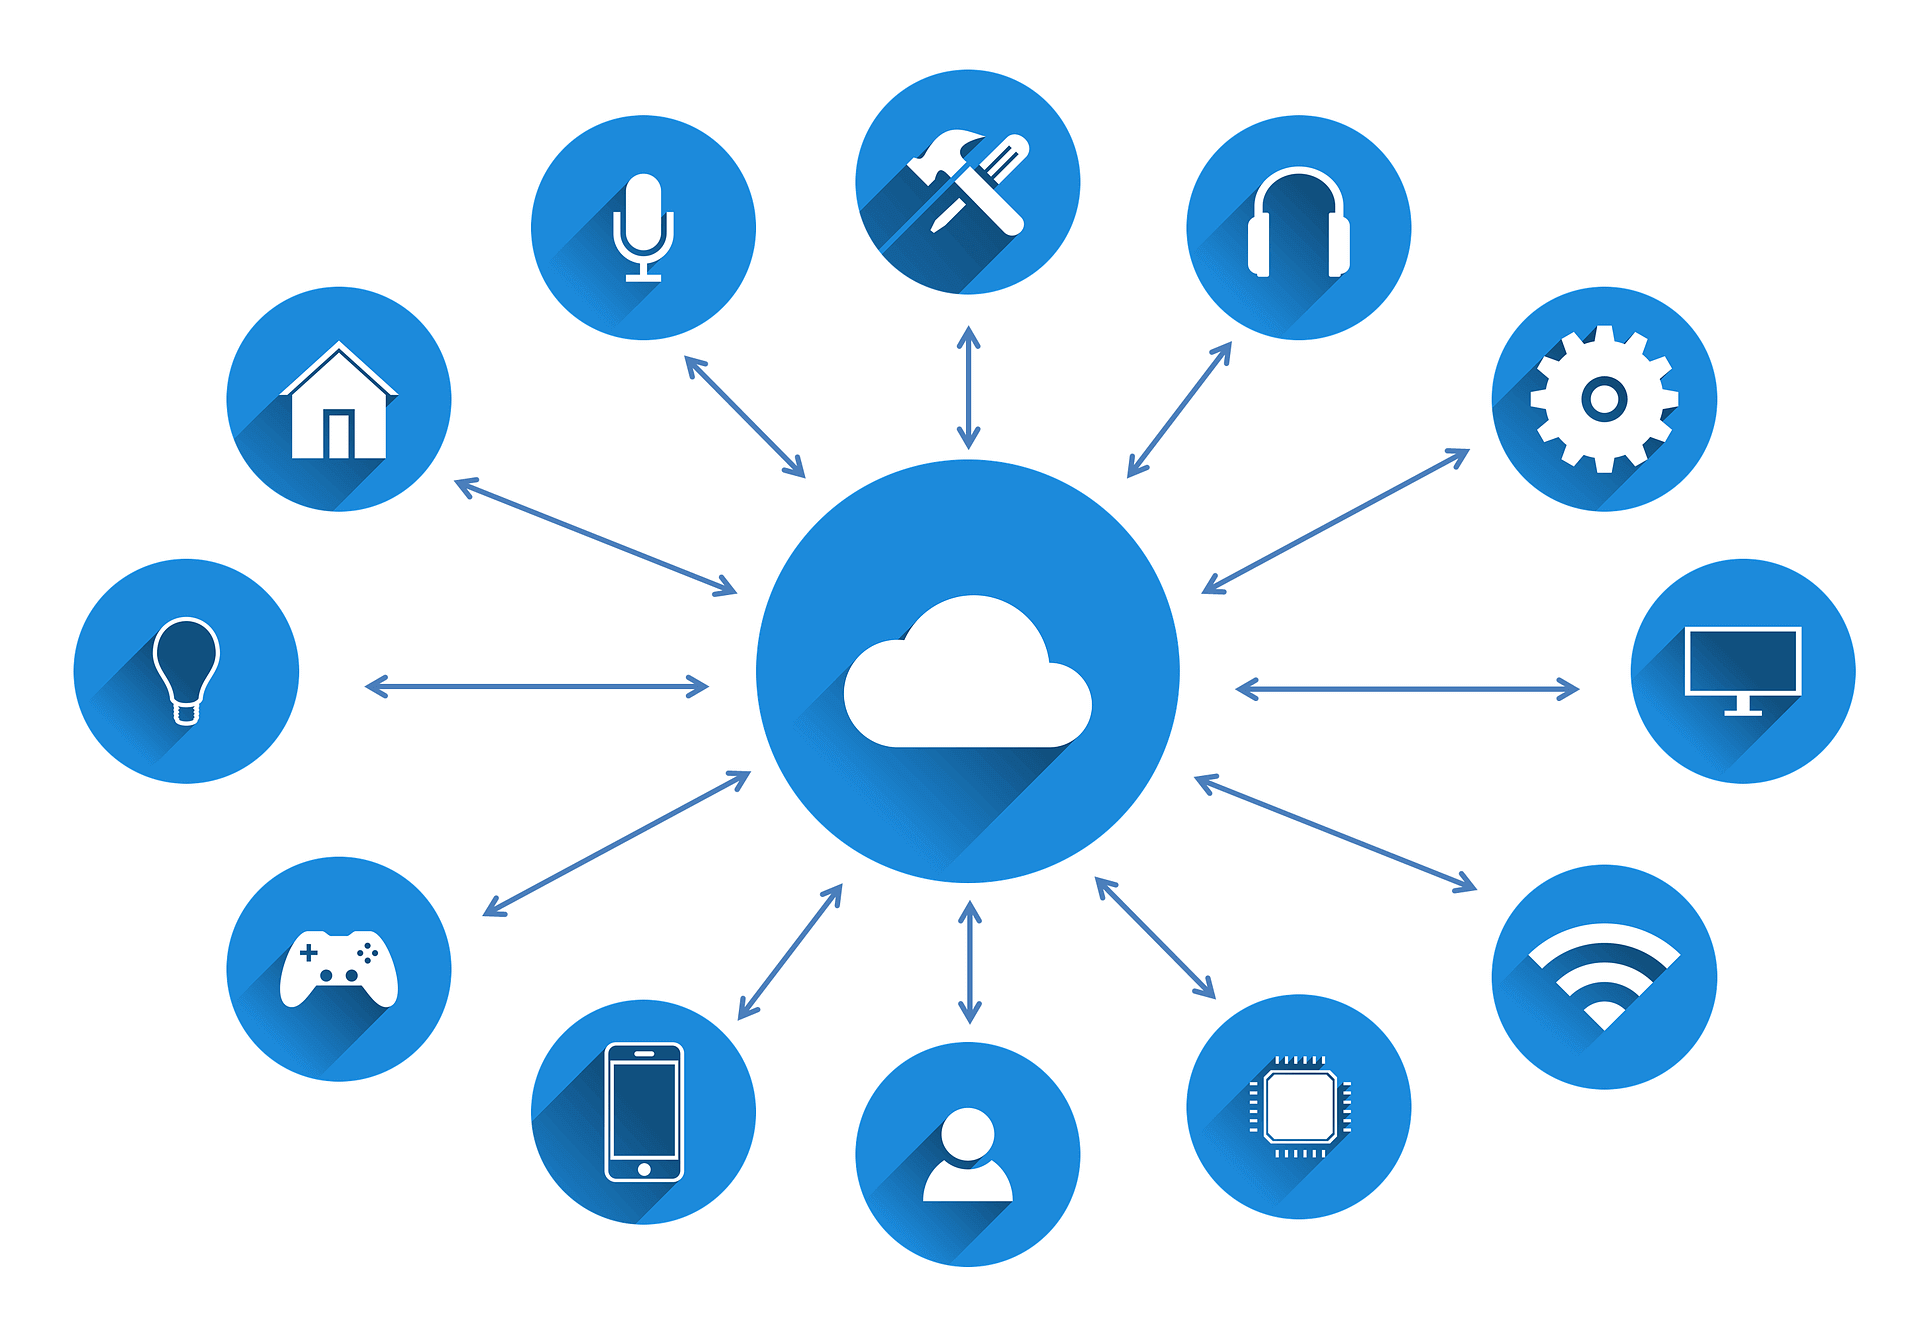 What are the Cloud Computing Services?